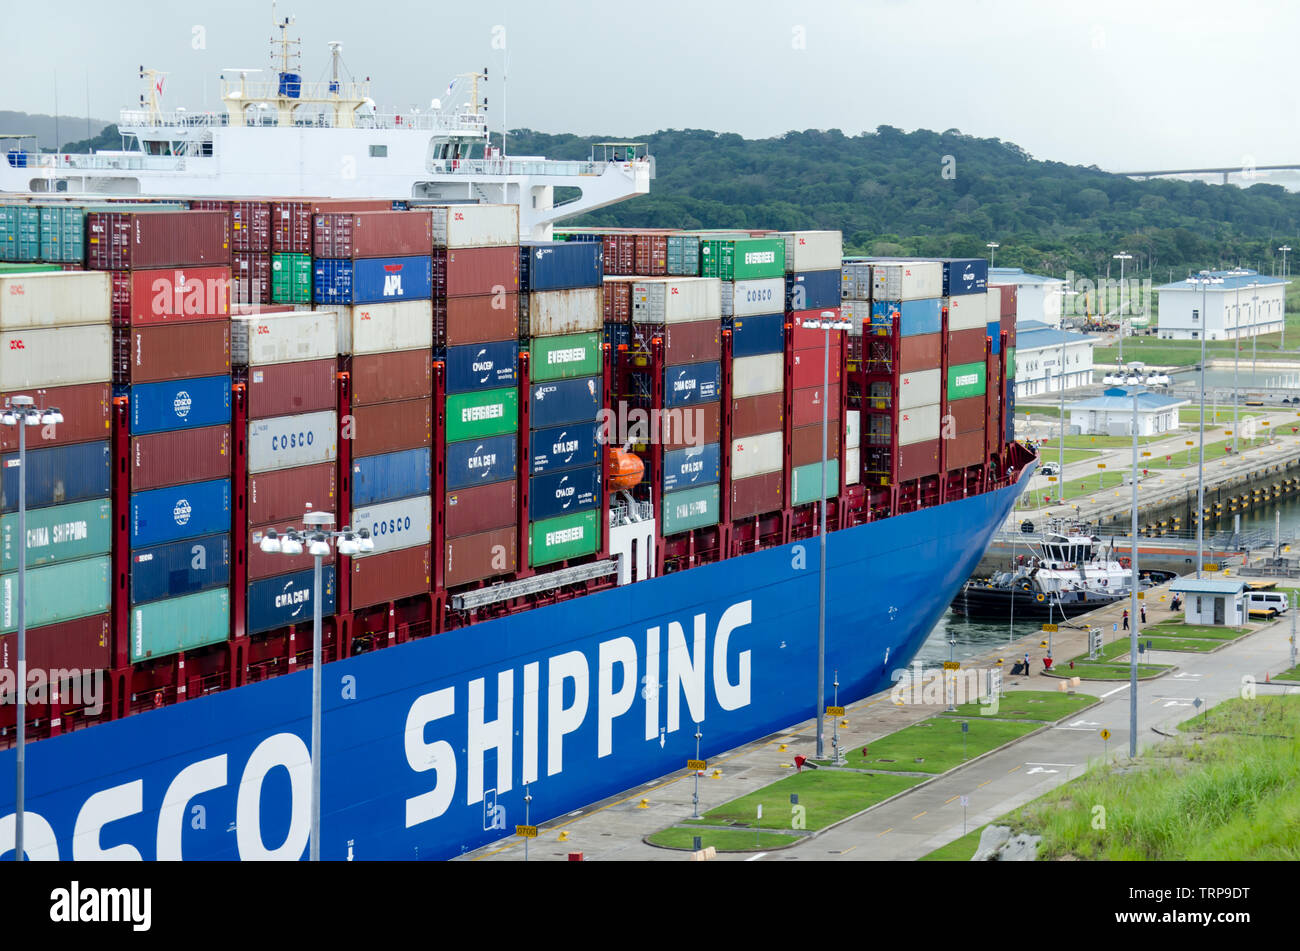 Cosco Shipping Lotus in transit through the expanded Panama Canal Stock Photo